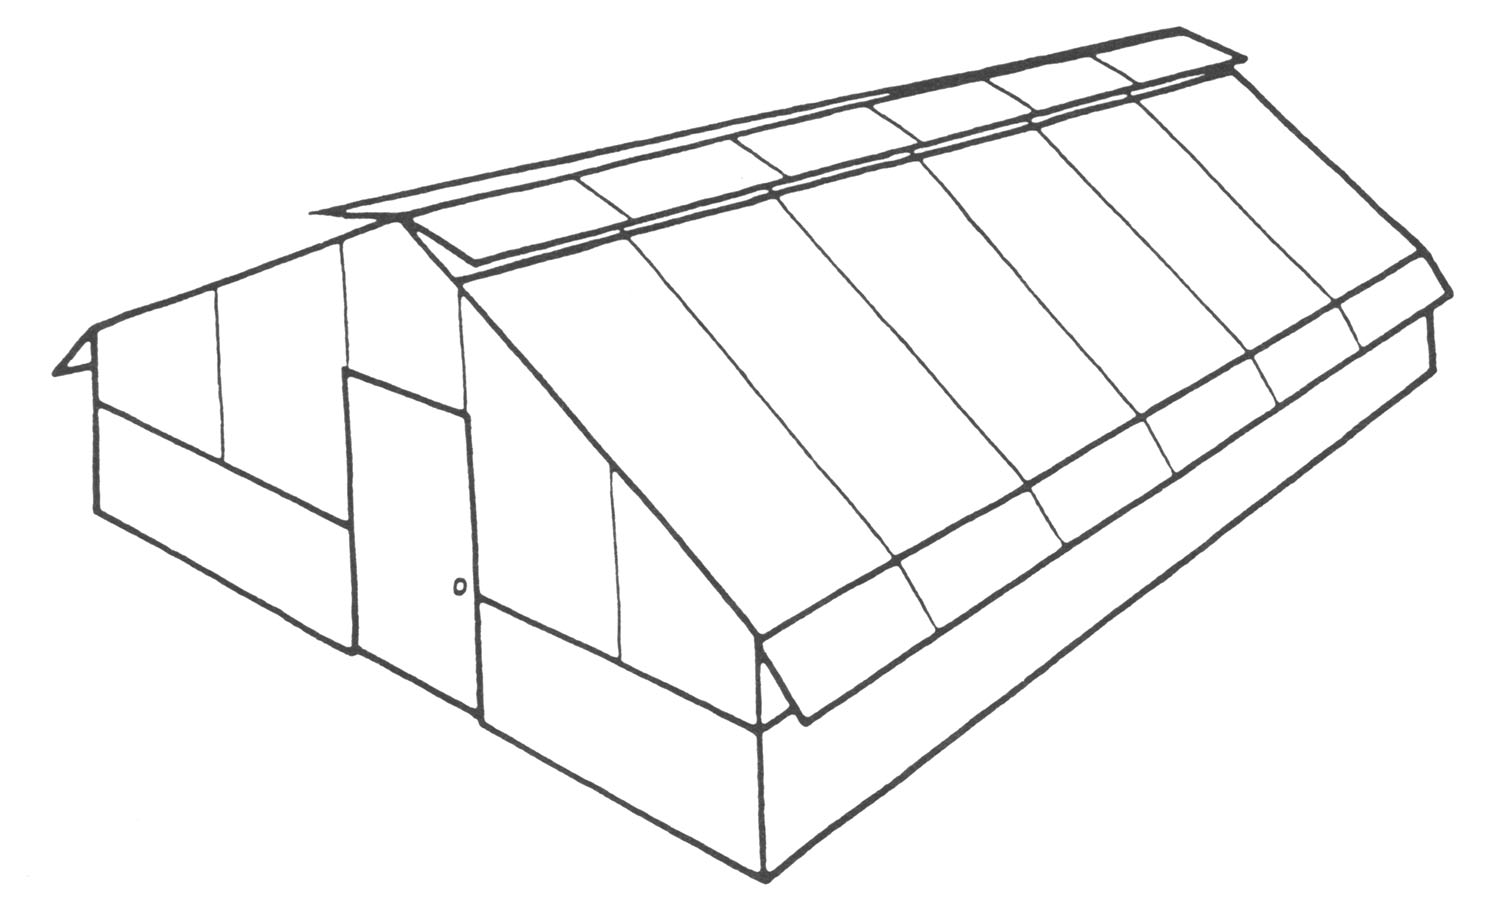 Sketch of a freestanding greenhouse.